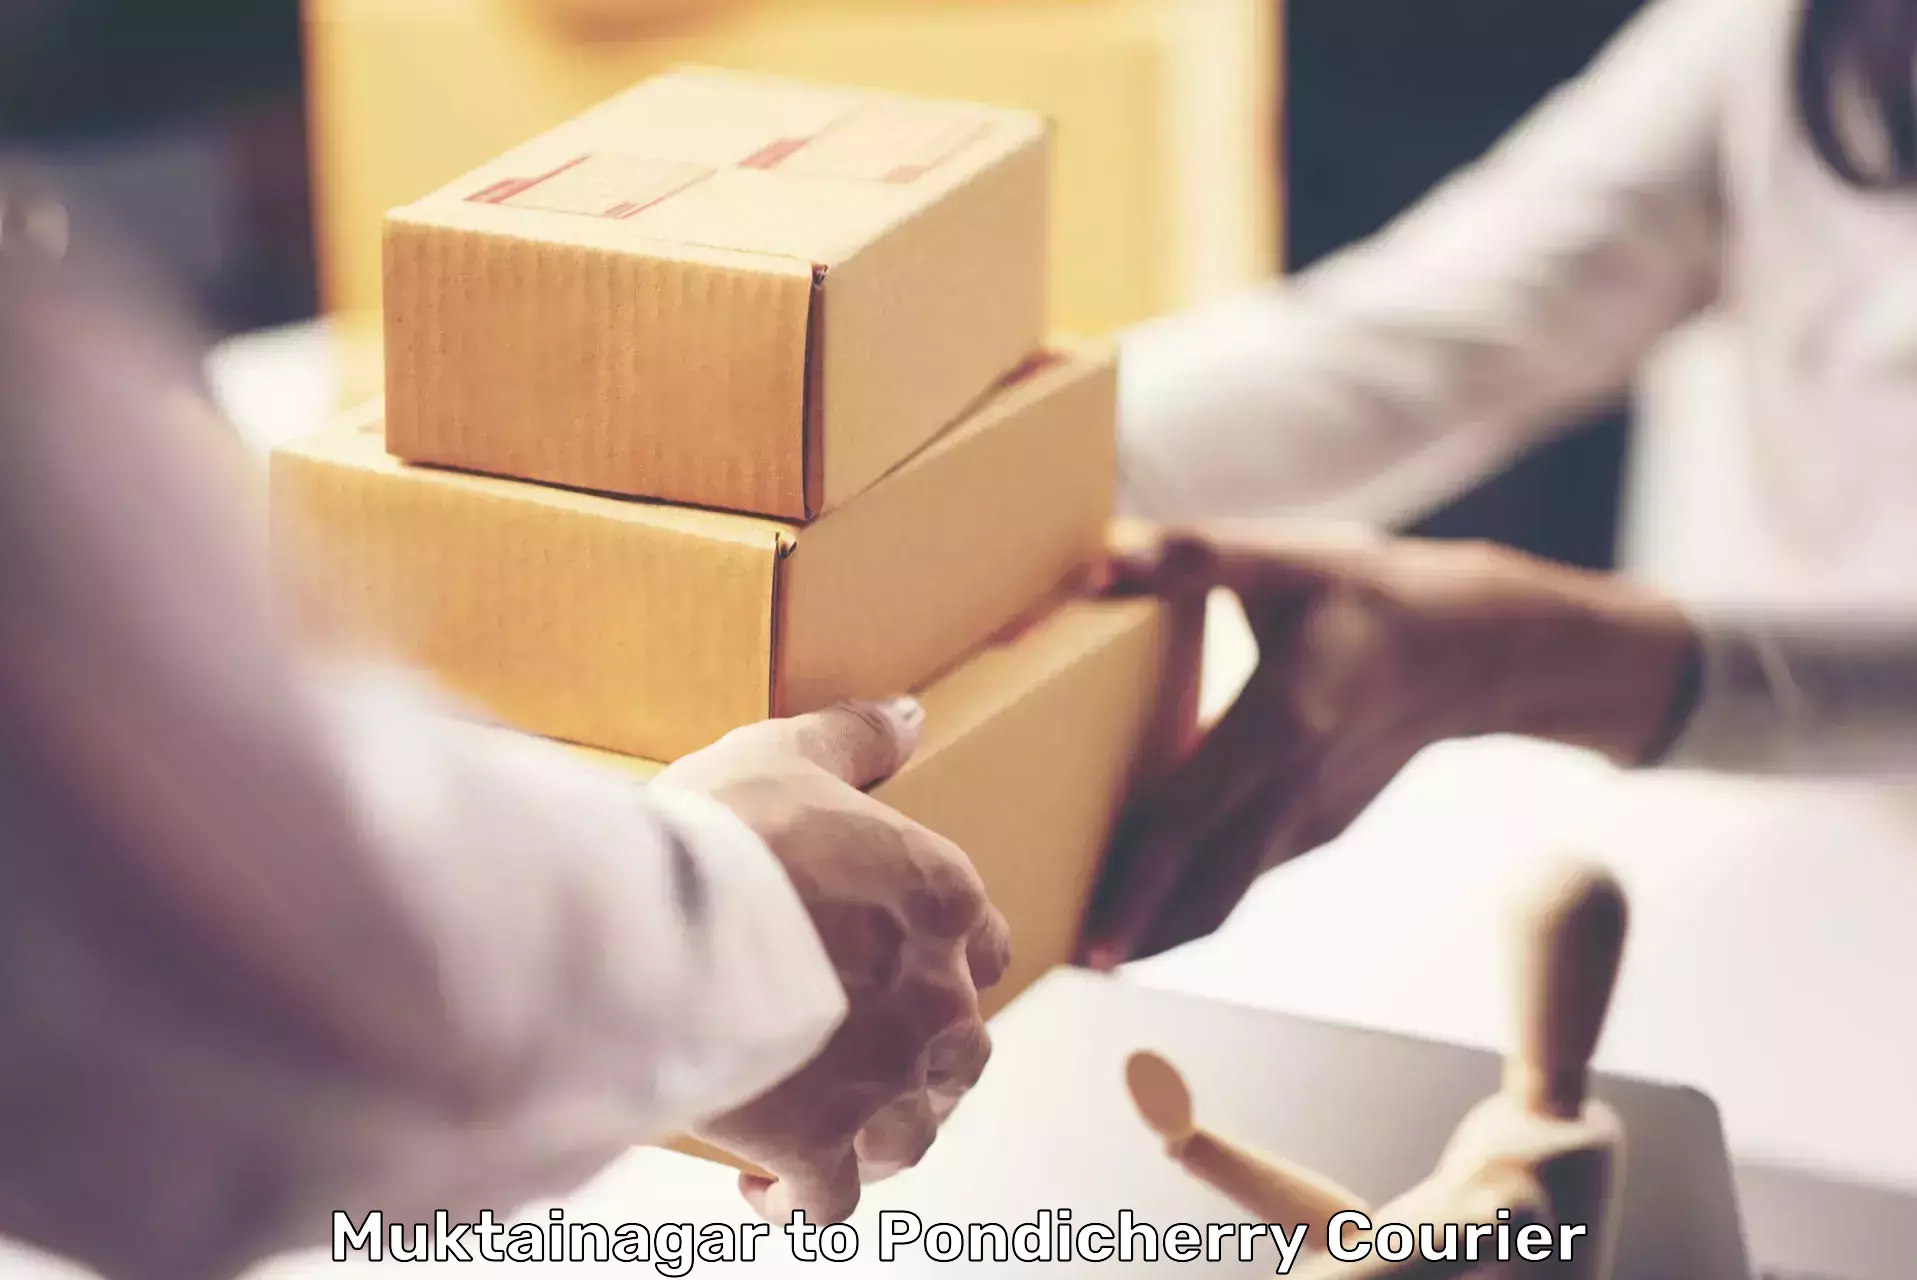 Personal courier services in Muktainagar to Metttupalayam